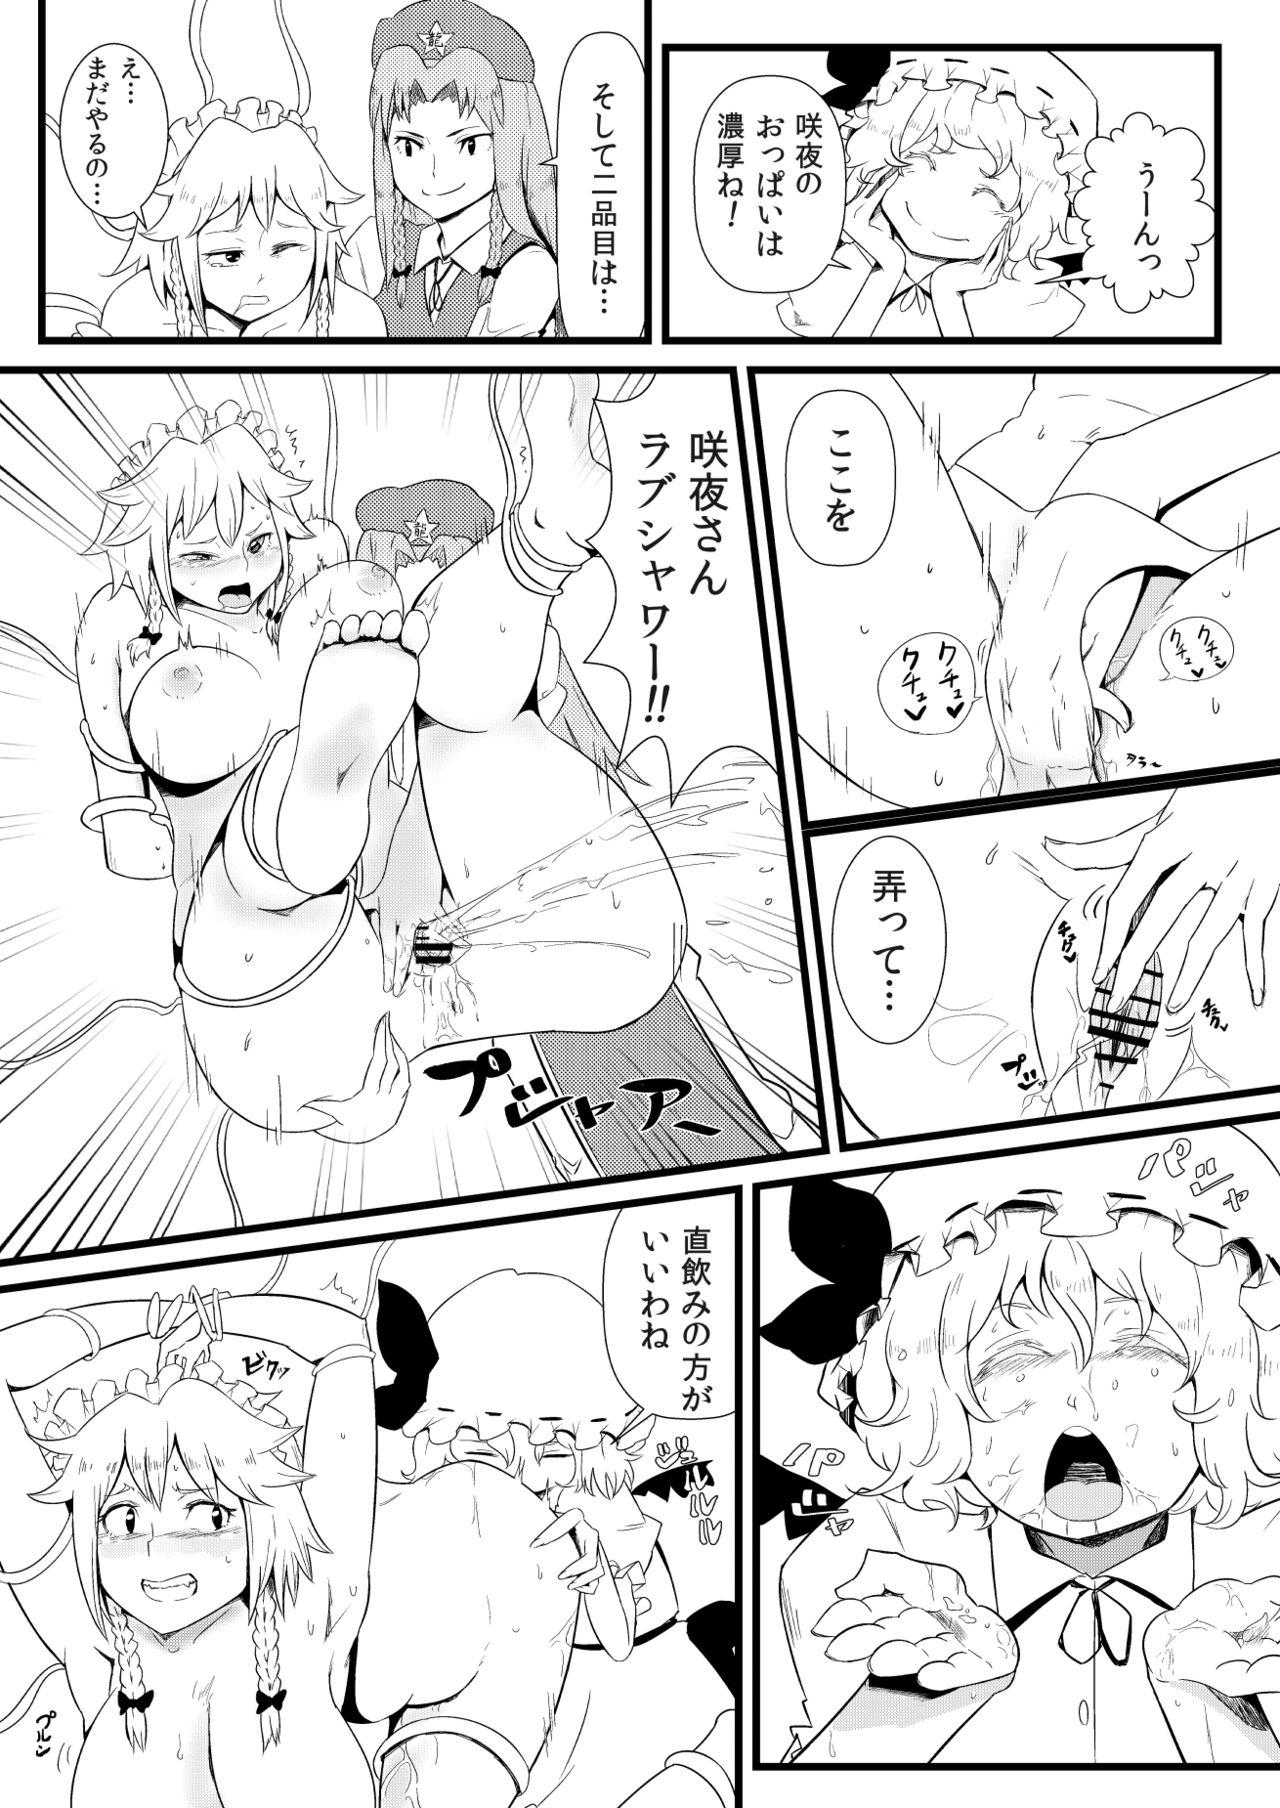 Outdoor 東方板としあき合同誌5 - Touhou project Cocks - Page 7